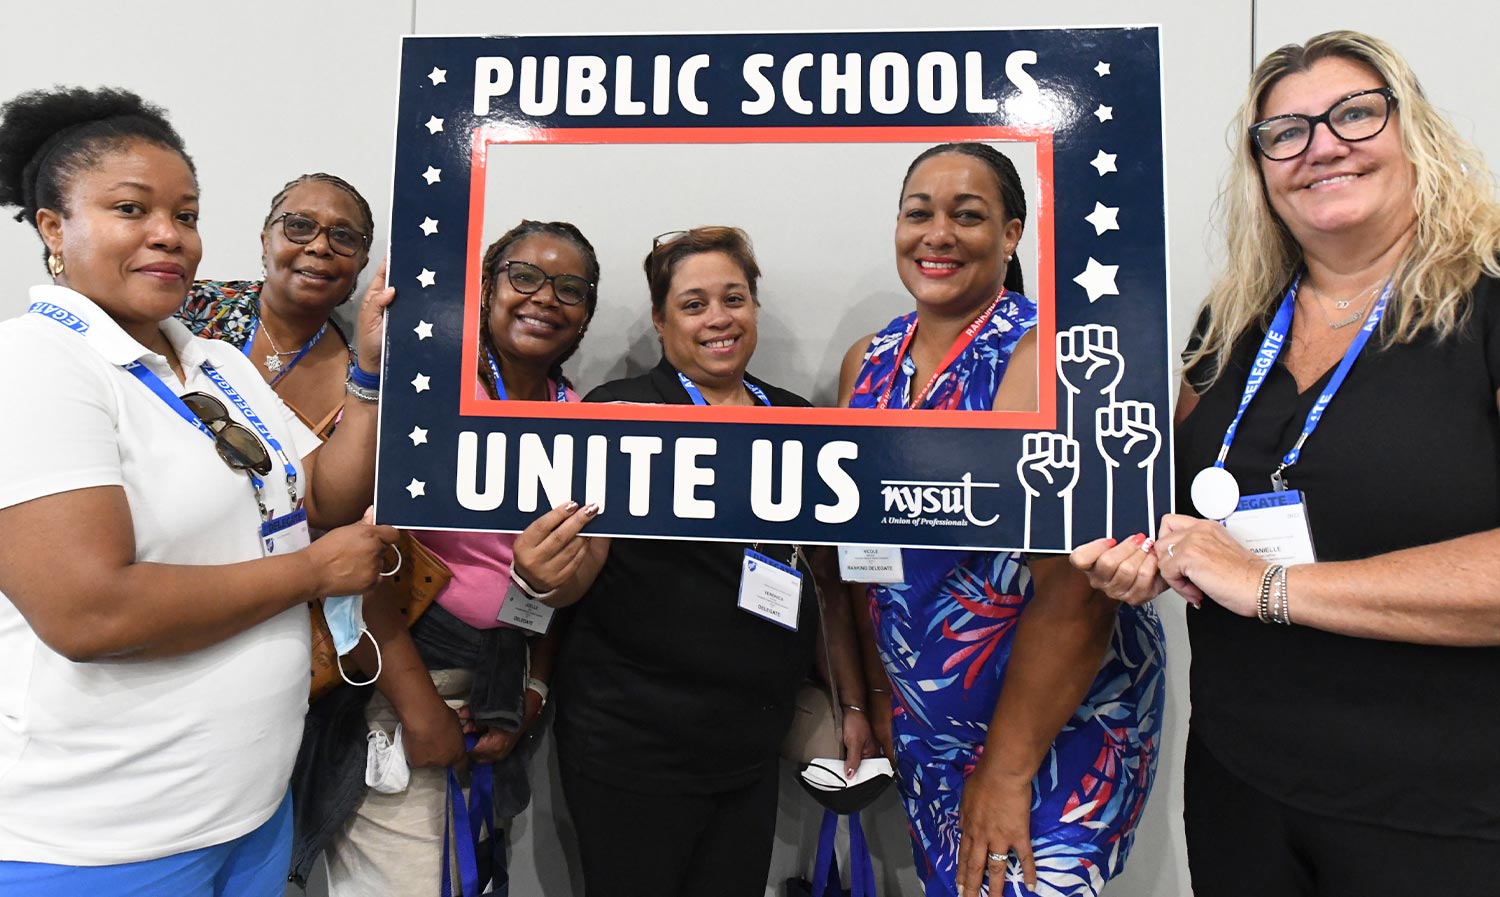 women at the AFT Convention take a group photo holding a "Public Schools Unite Us" graphic frame